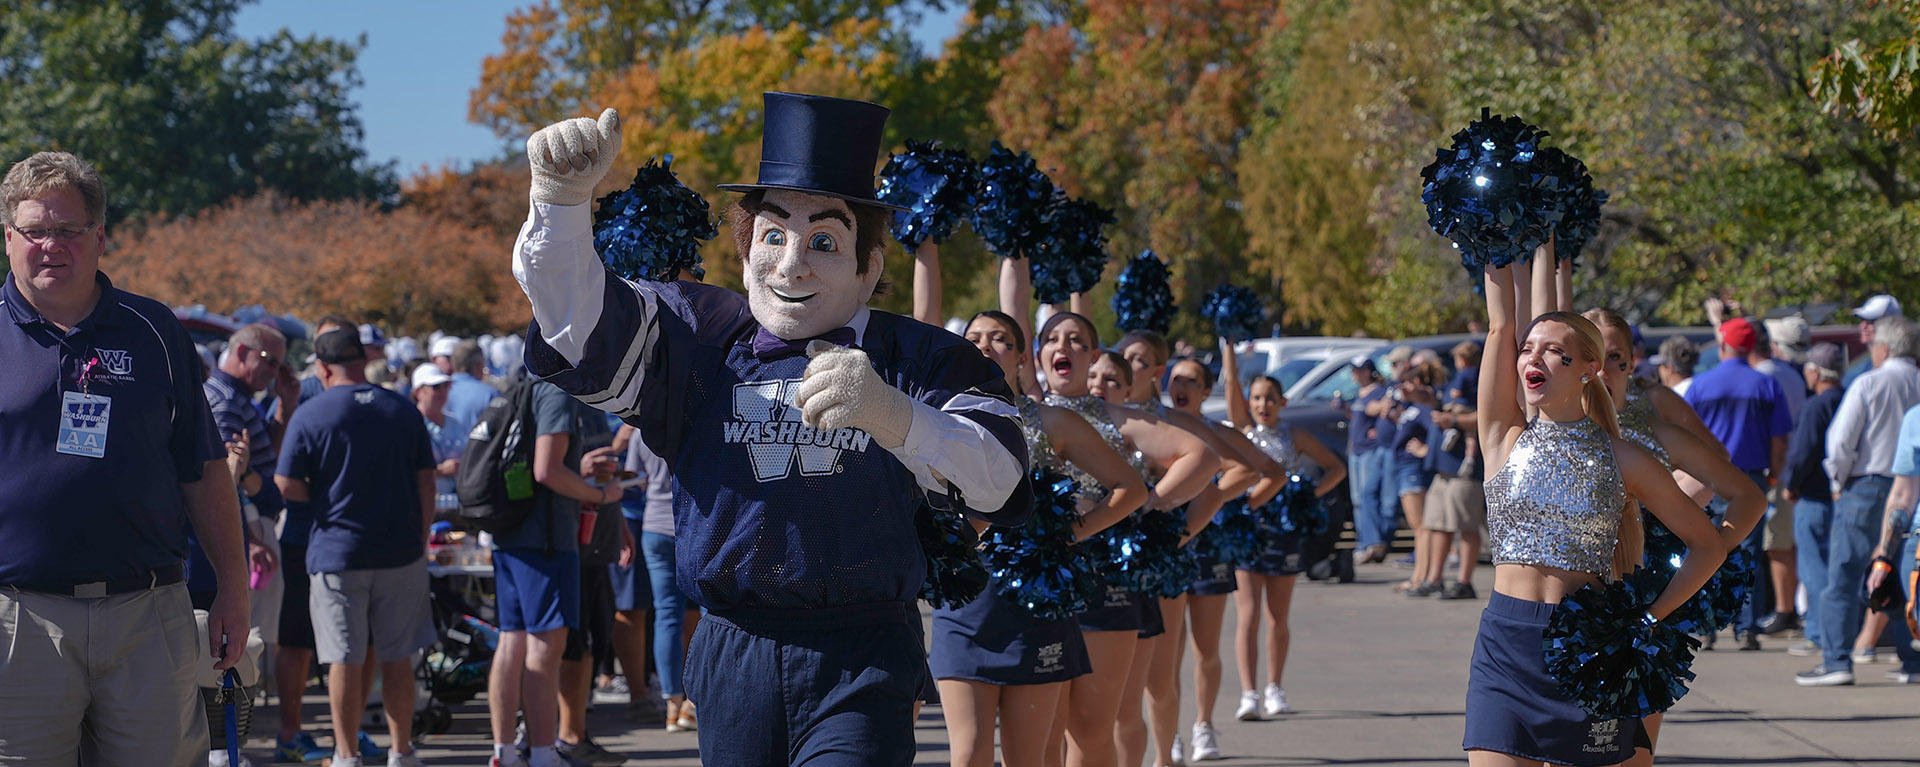 Mr. Ichabod and cheerleaders at a tailgate